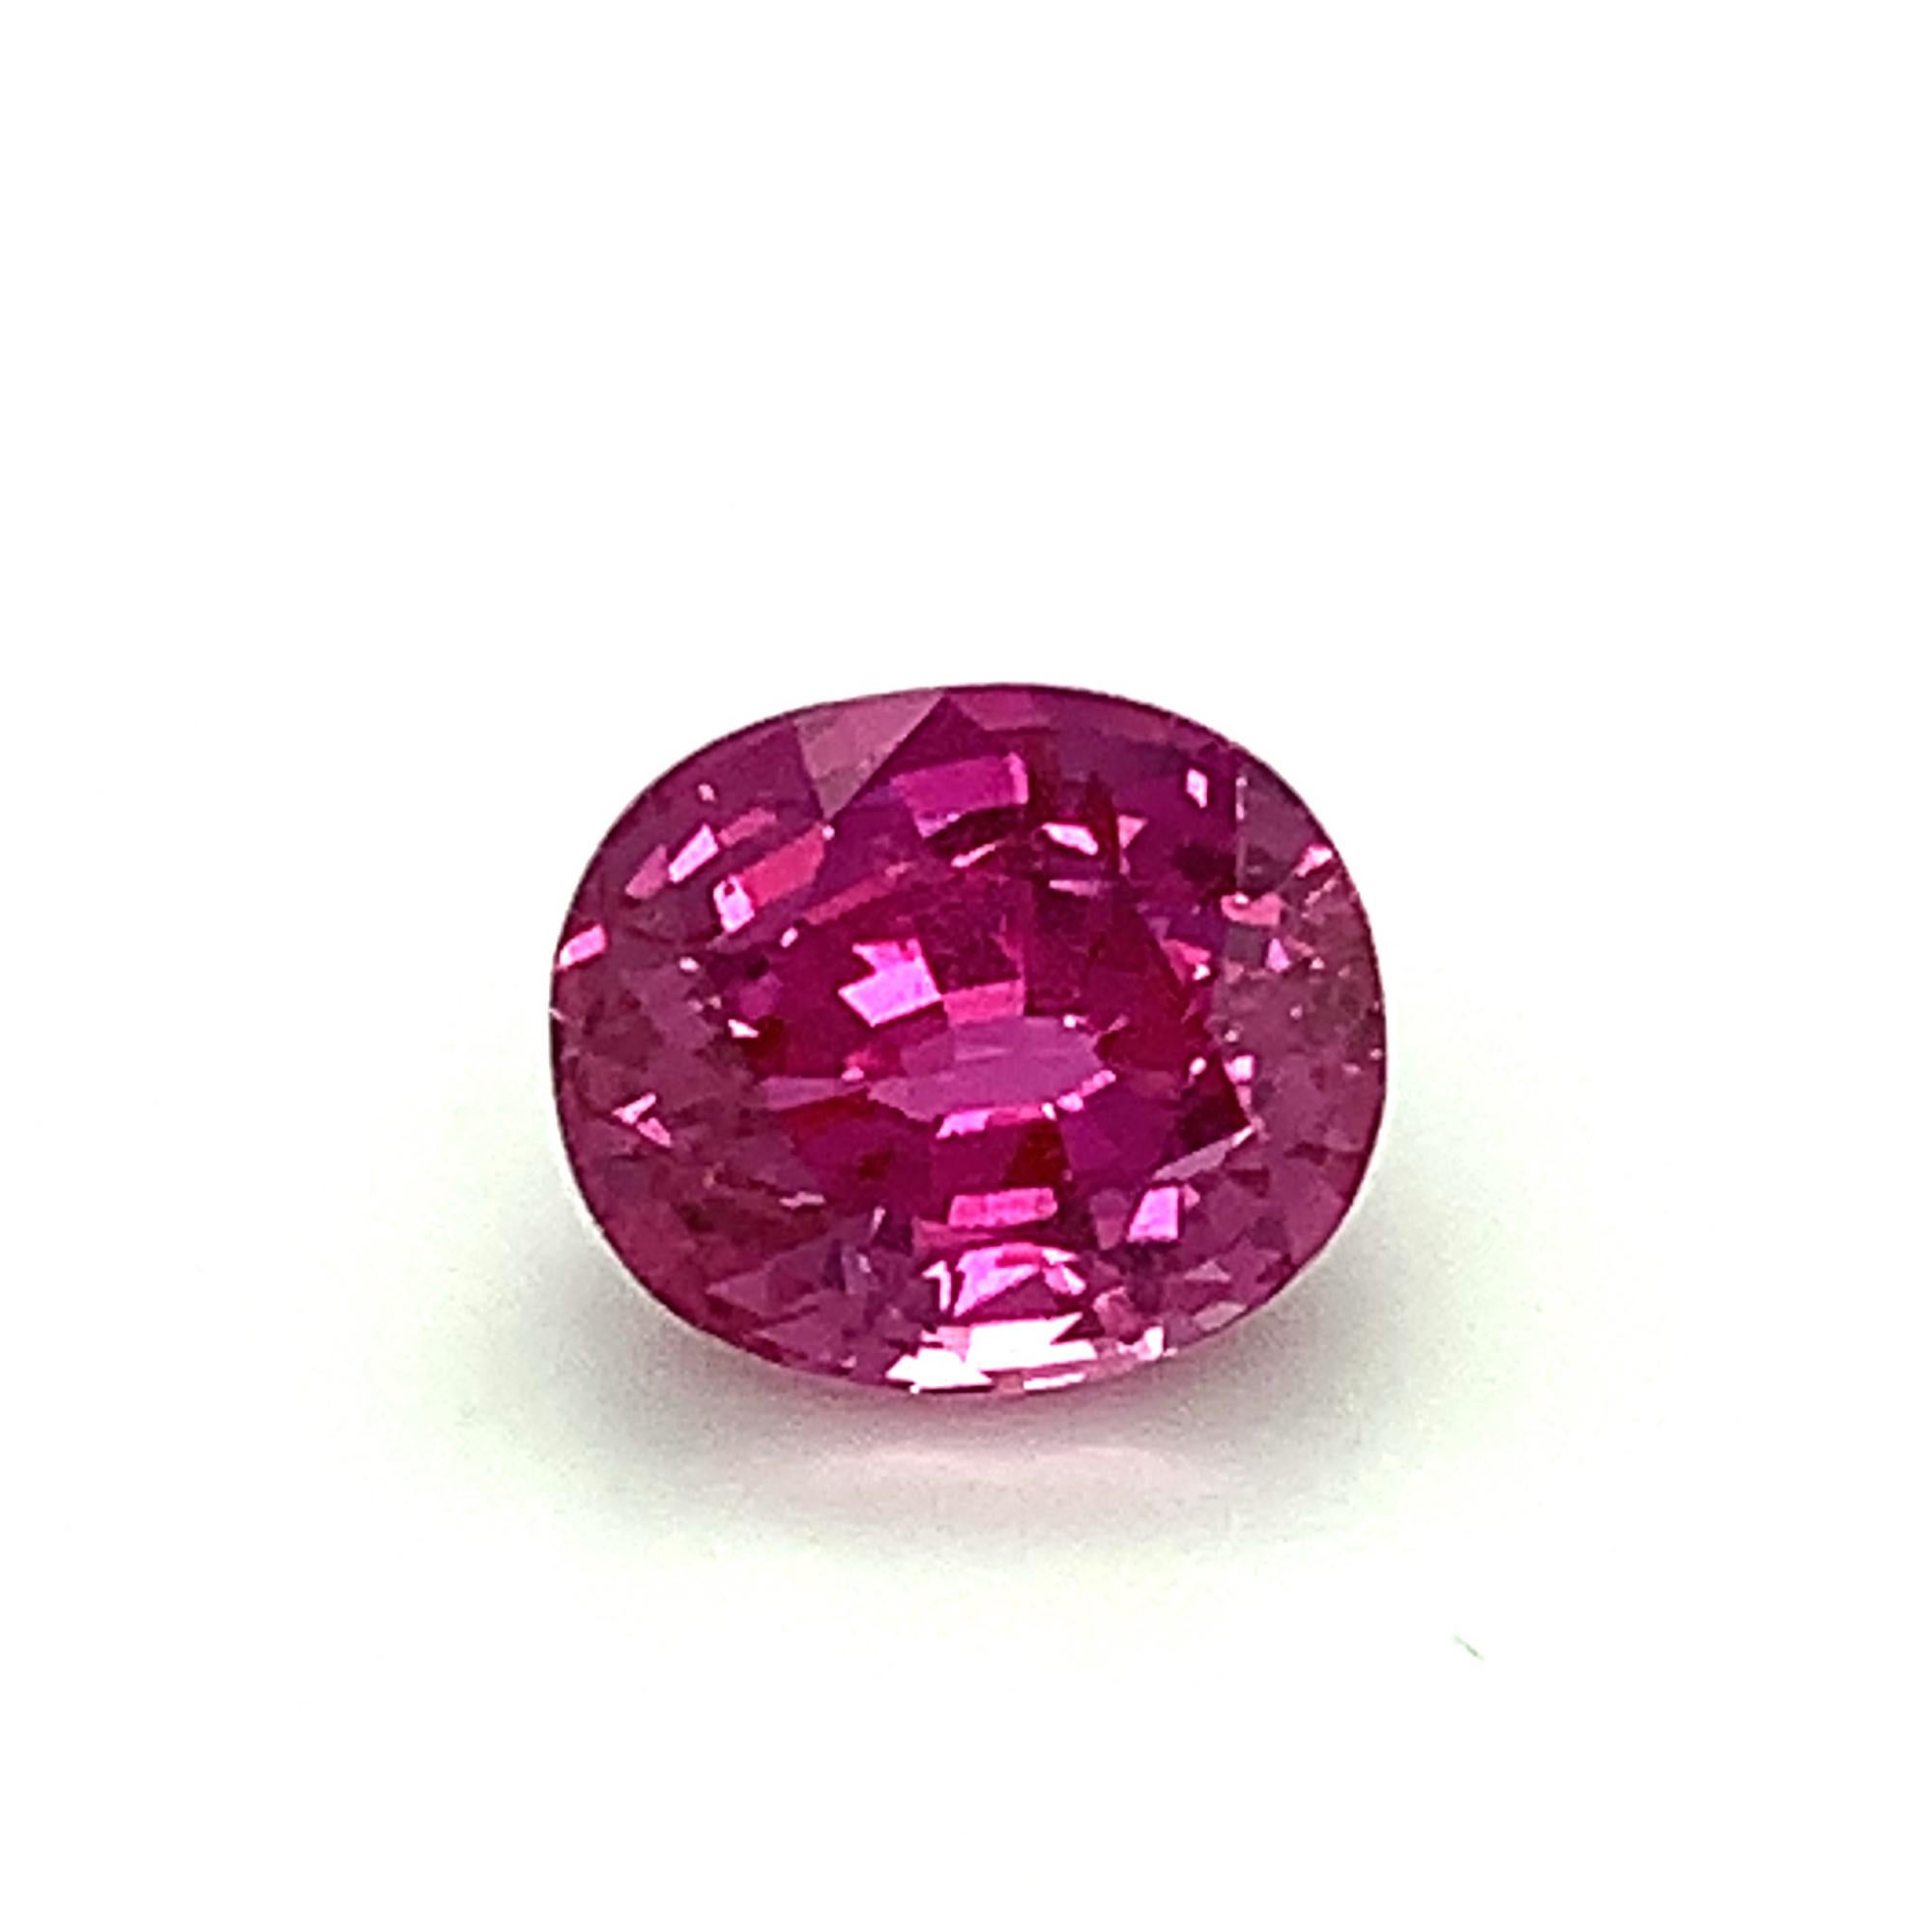 5.00 Carat Purple Pink Sapphire Oval, Unset Loose Gemstone, GIA Certified 1